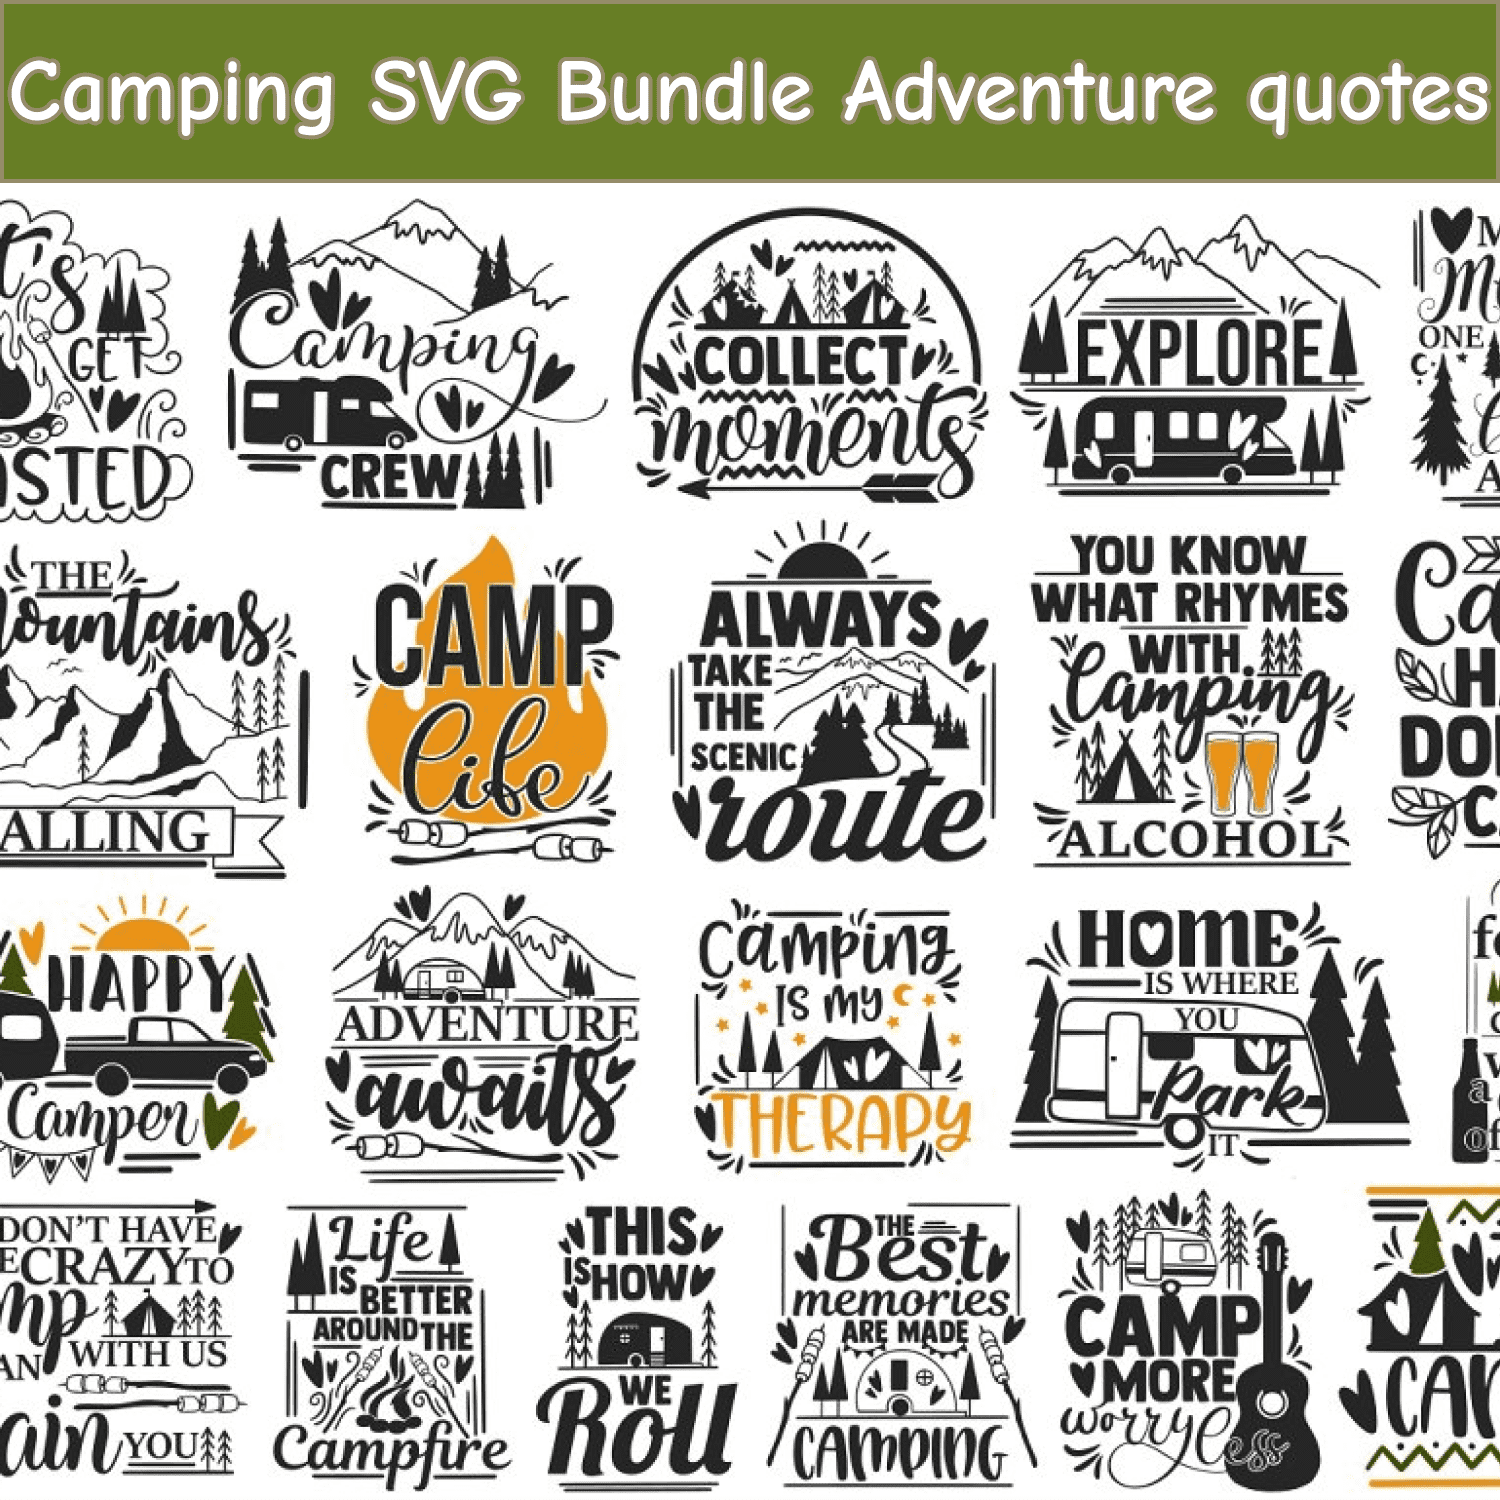 Camping SVG Bundle Adventure quotes cover.